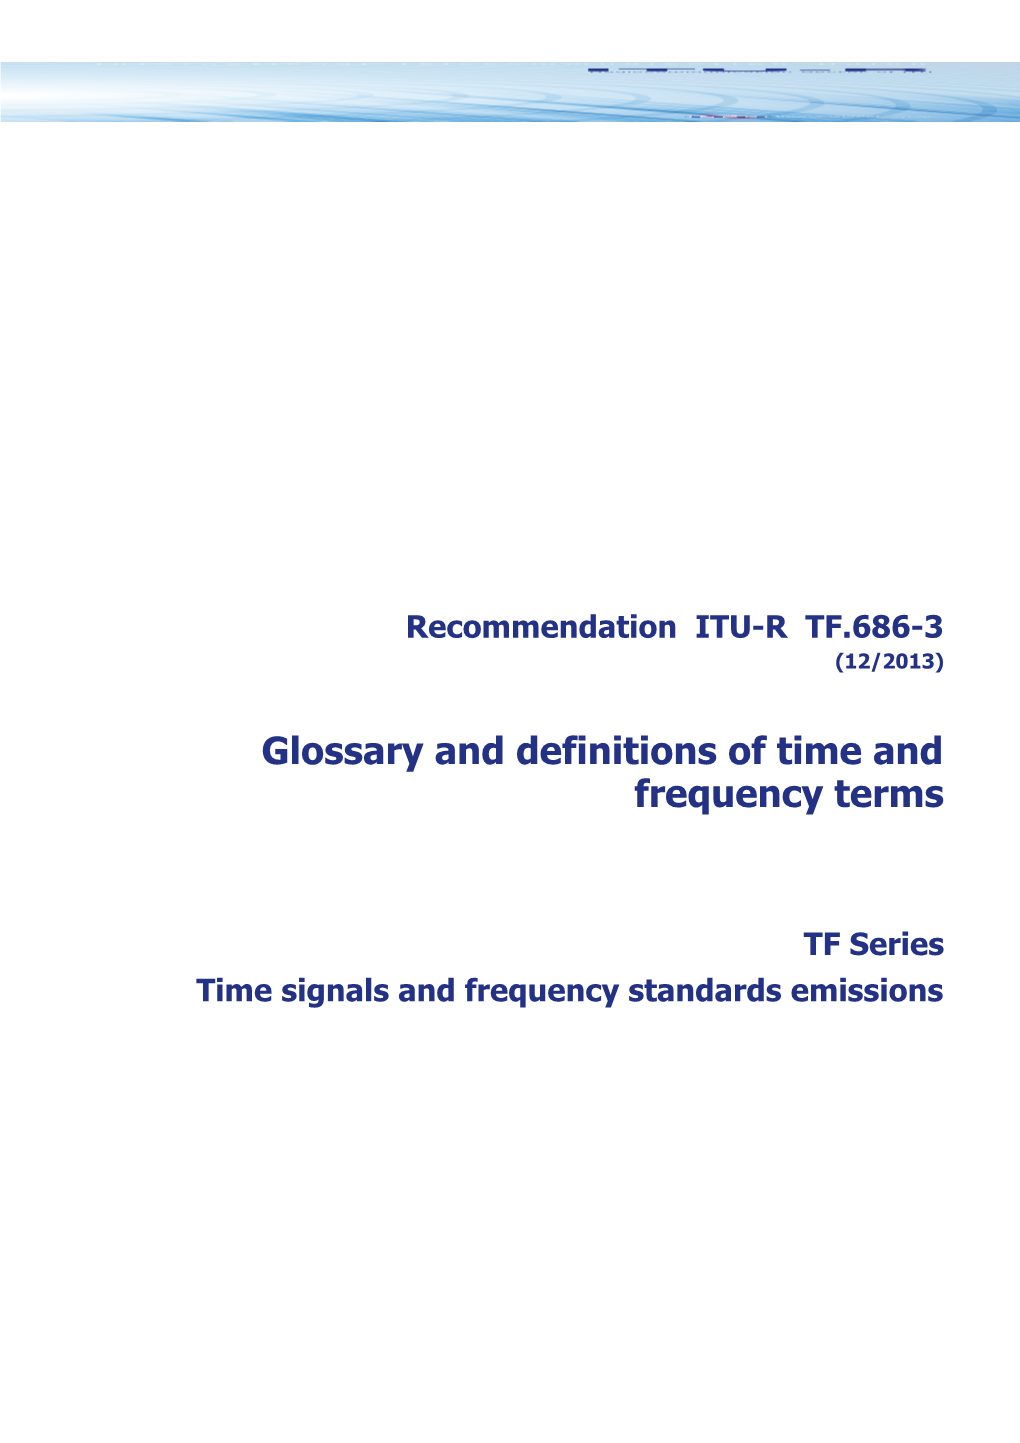 RECOMMENDATION ITU-R TF.686-3* - Glossary and Definitions of Time and Frequency Terms